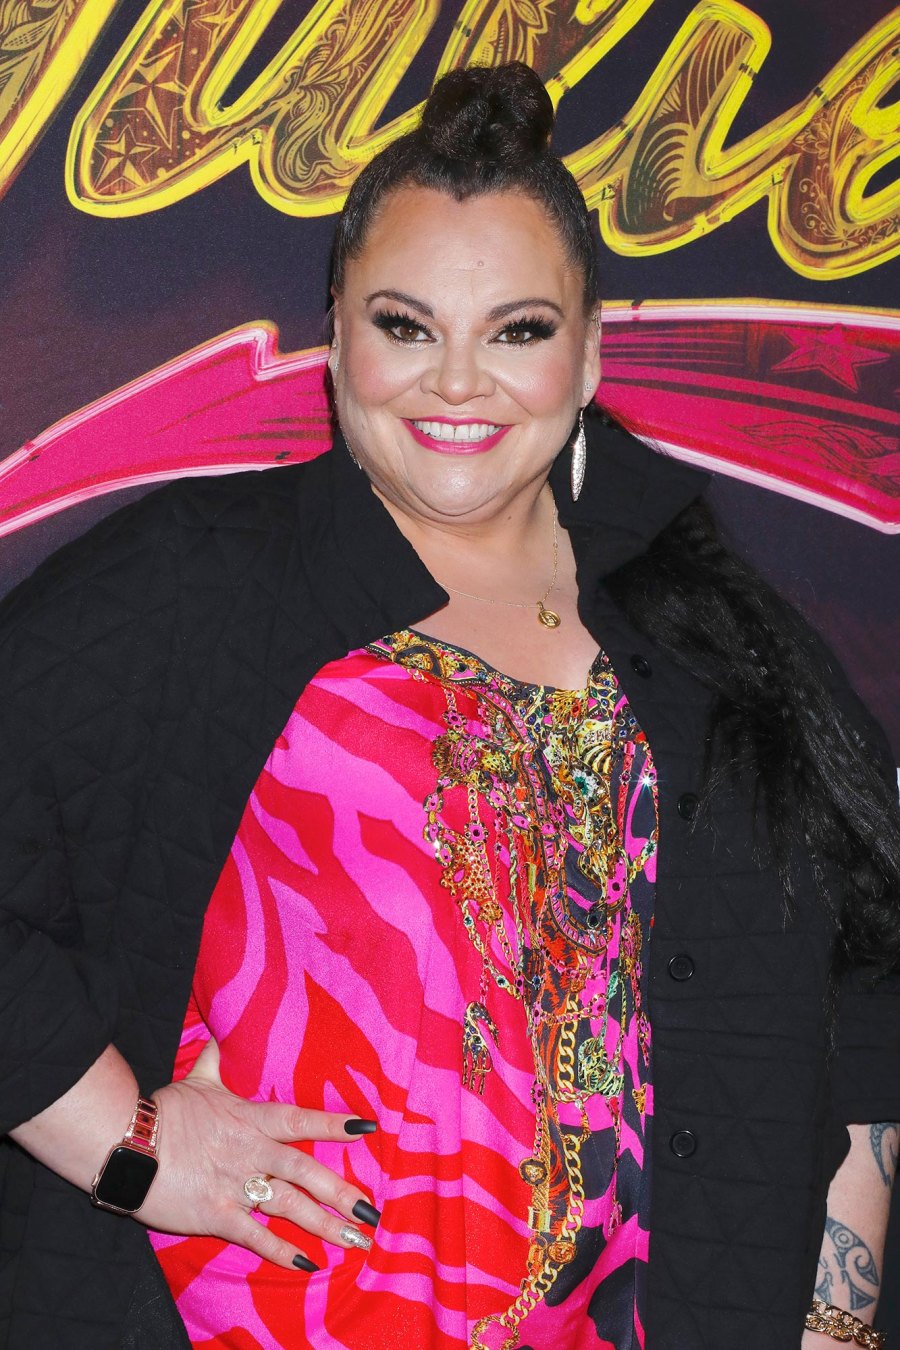 Keala Settle Wicked Movie Comprehensive Guide to the Characters